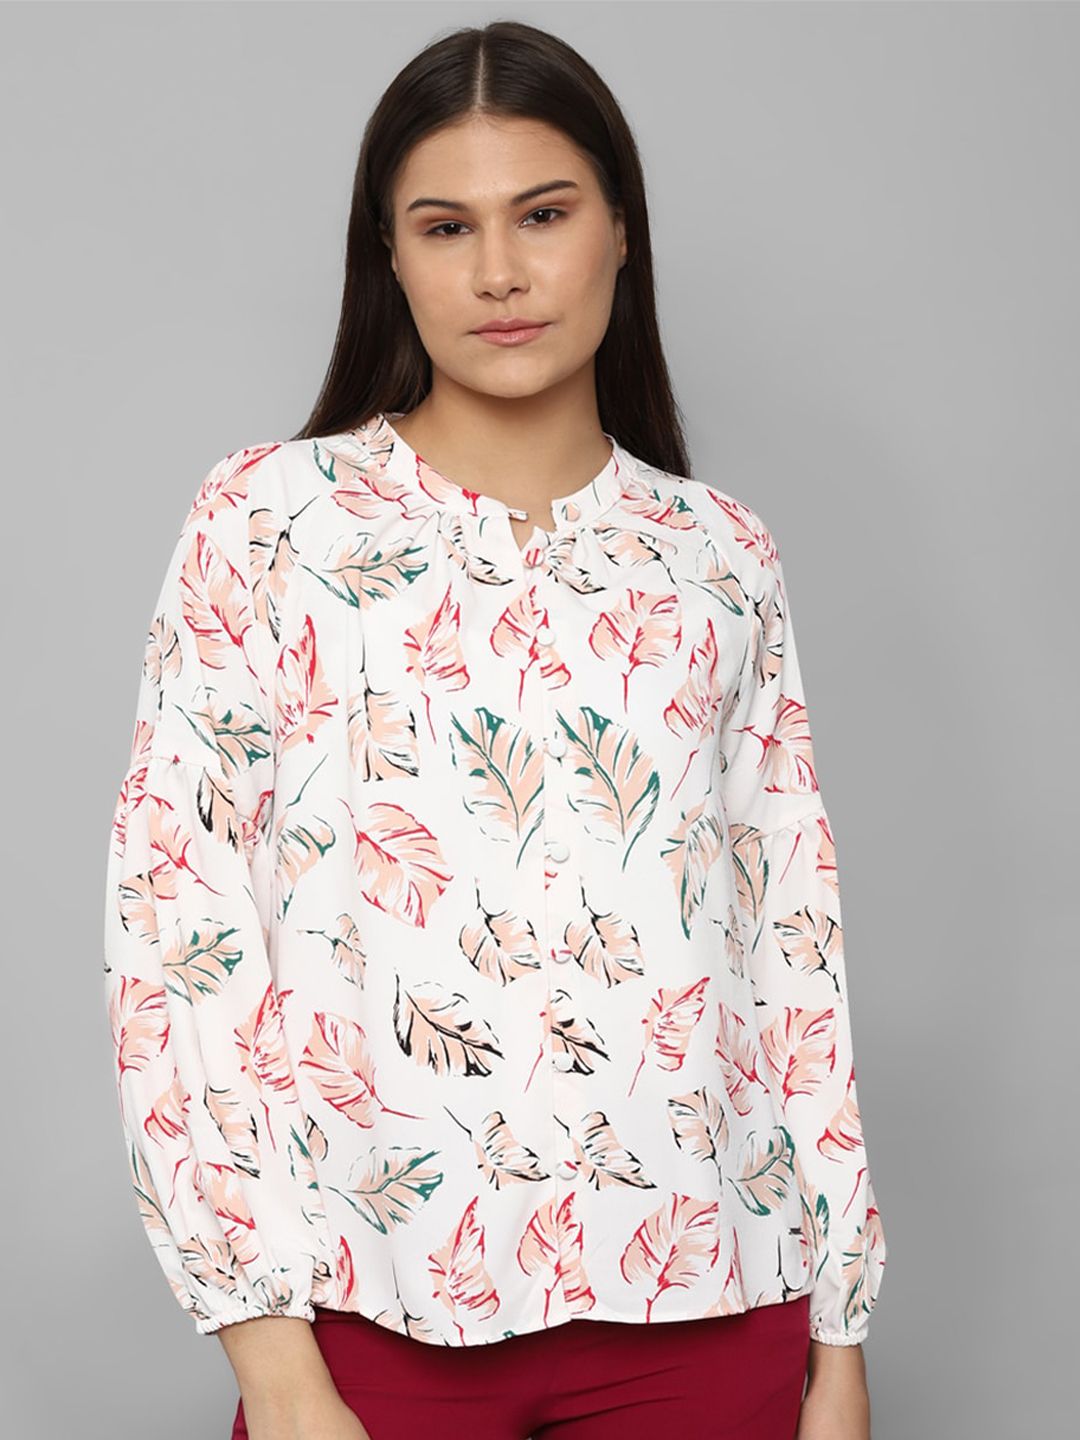 Allen Solly Woman White Floral Printed Mandarin Collar Top Price in India